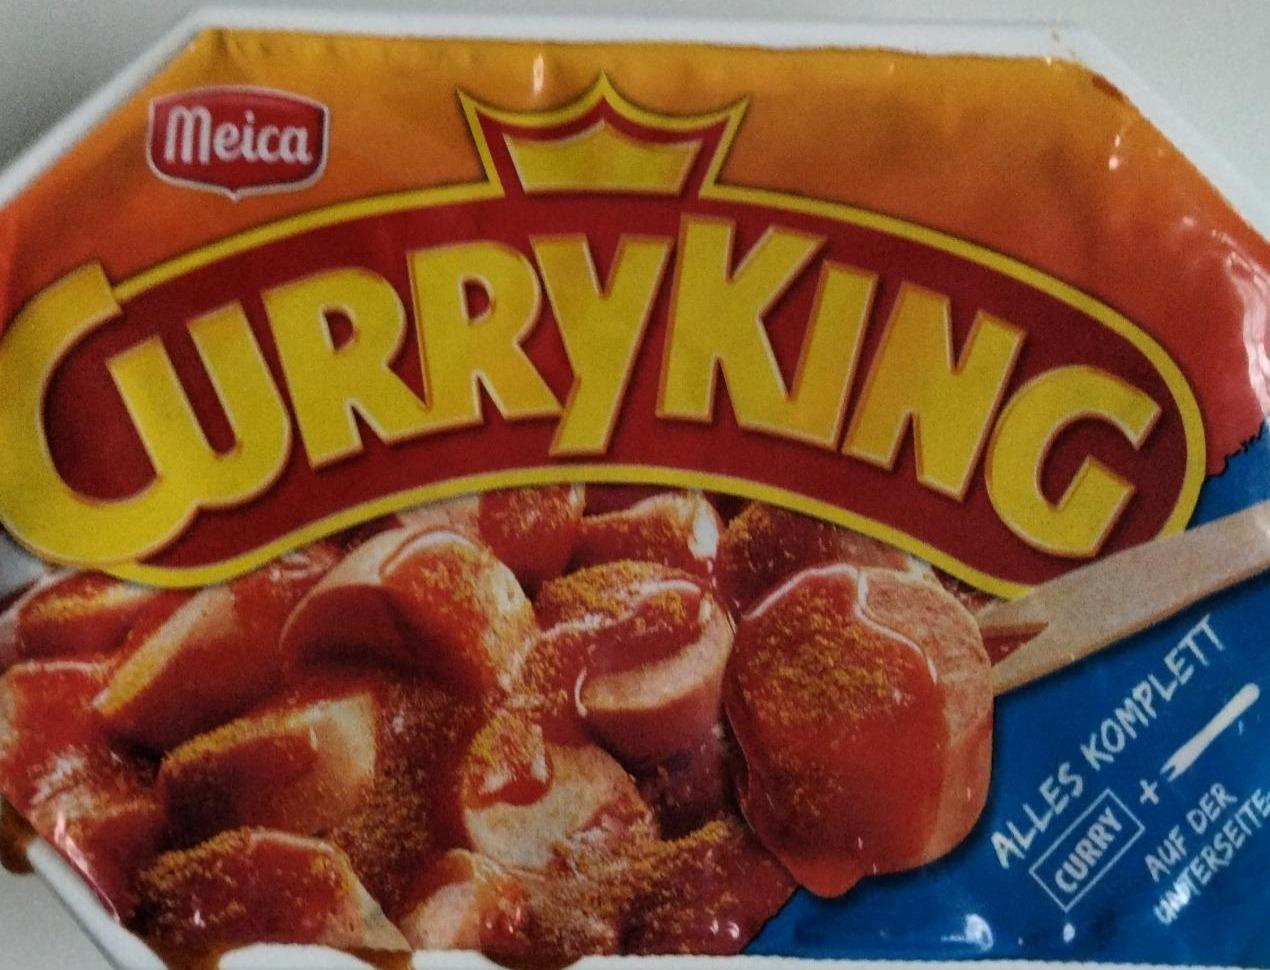 Фото - CurryKing Meica